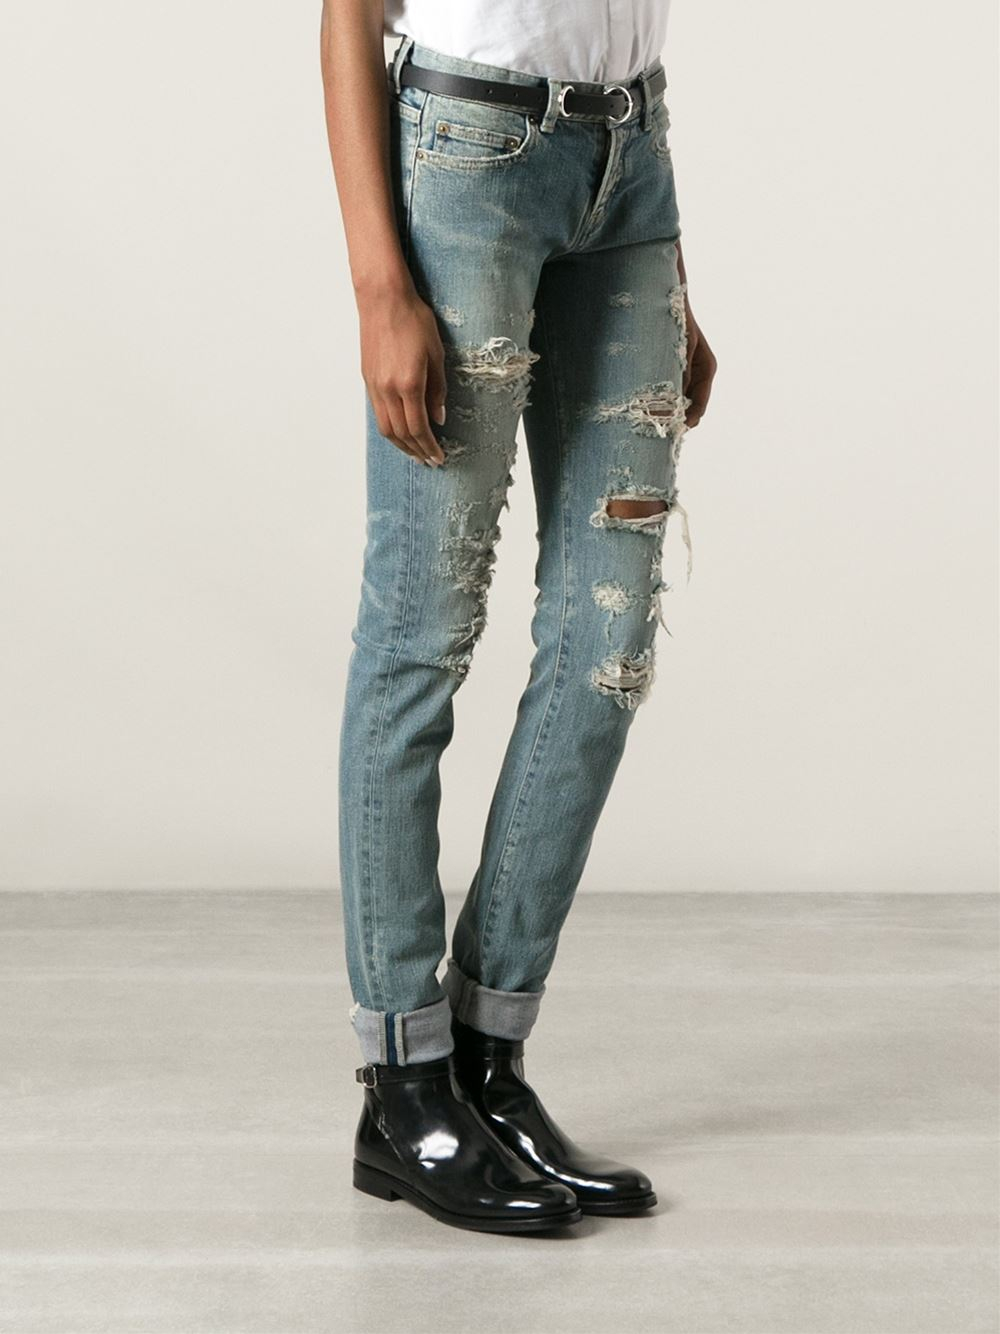 Saint Laurent Ripped Skinny Jeans in Blue - Lyst